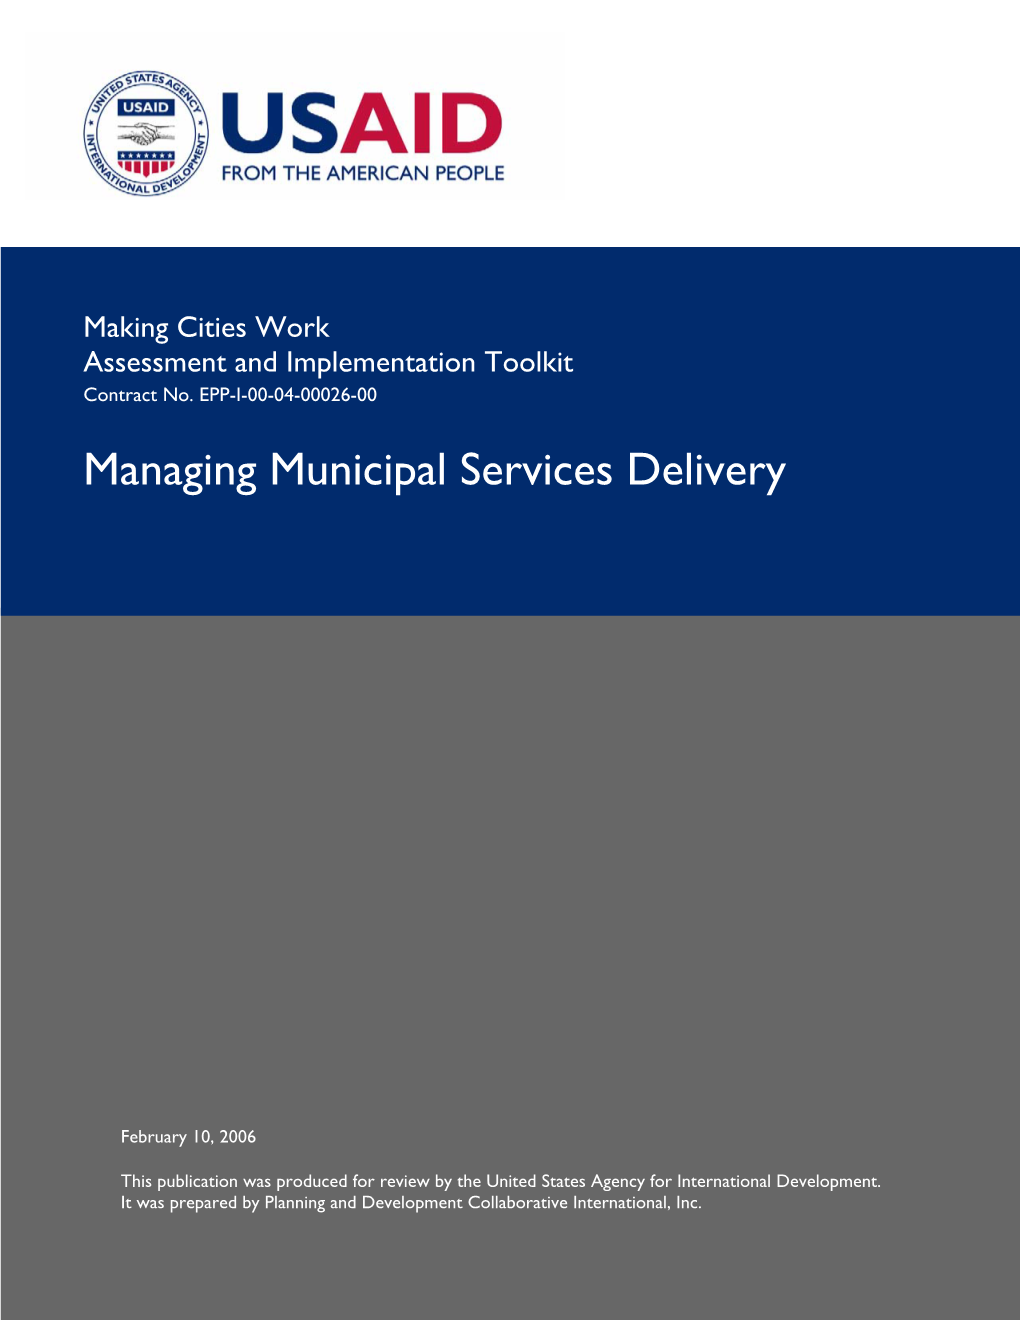 Managing Municipal Services Delivery